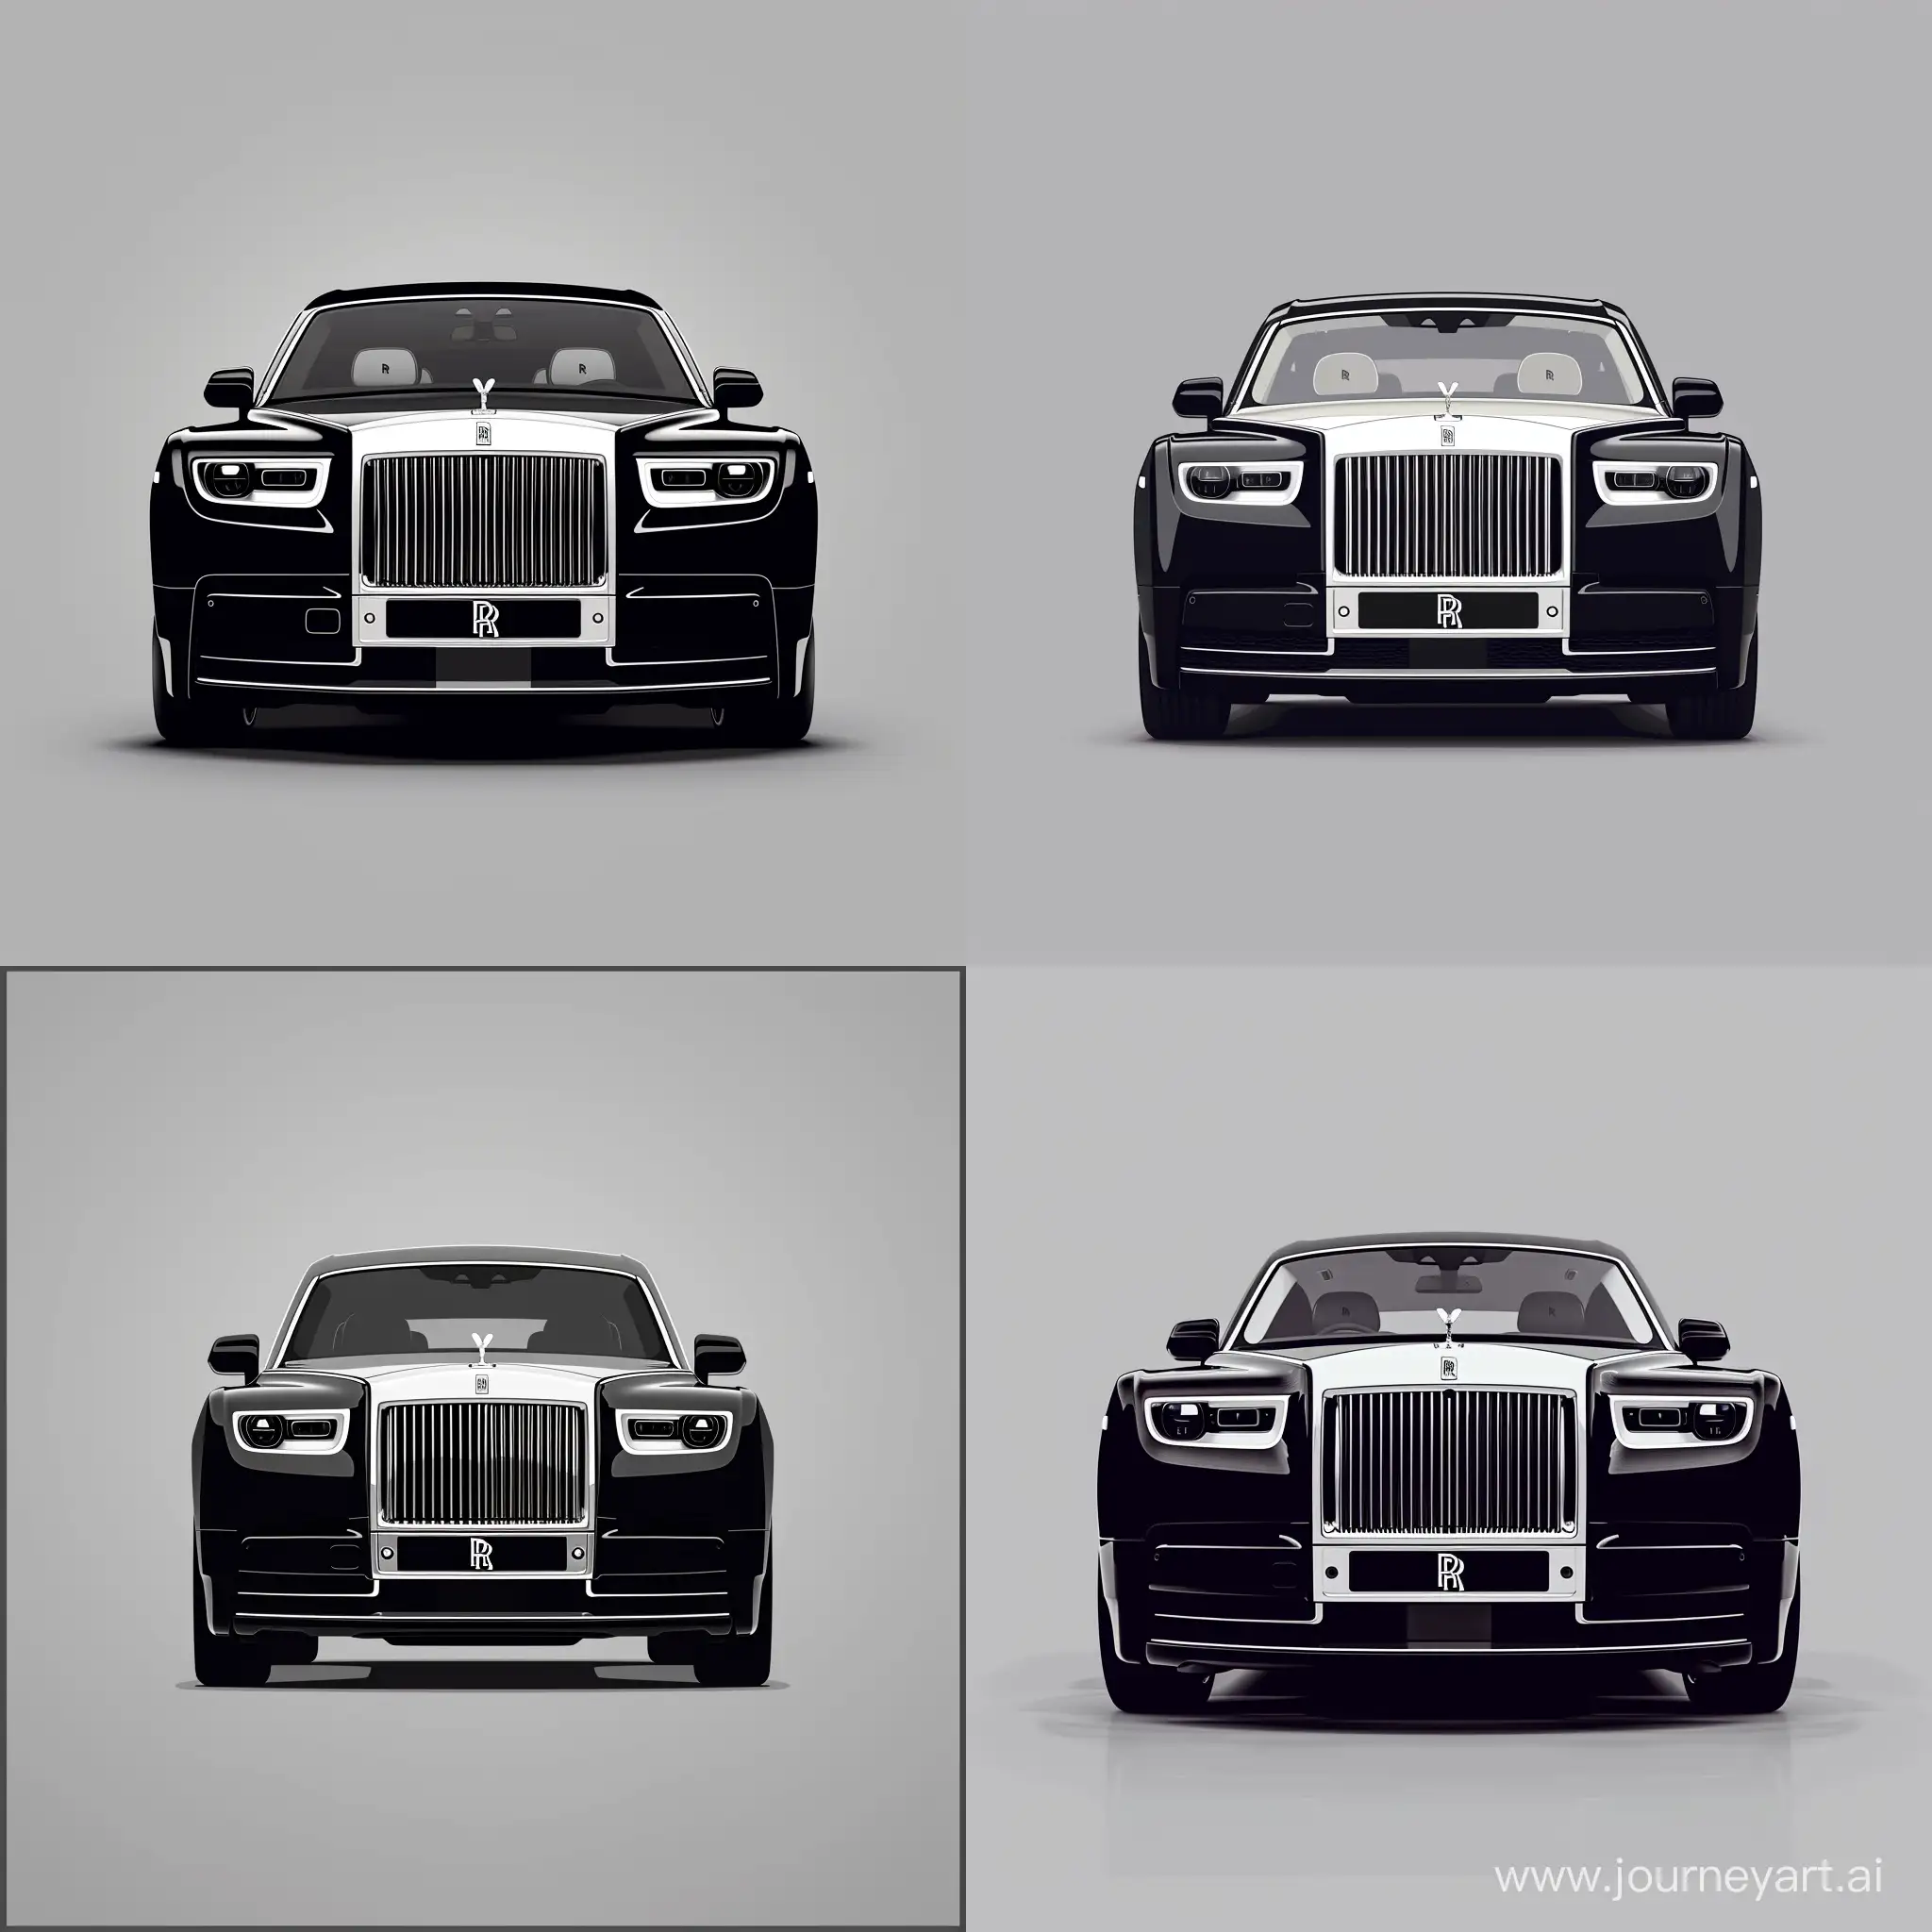 Minimalism 2D Illustration Car of Front View, RollsRoyce Phantom: Black Body Color & White Body Details, Simple Gray Background, Affinity Designer Software, High Precision